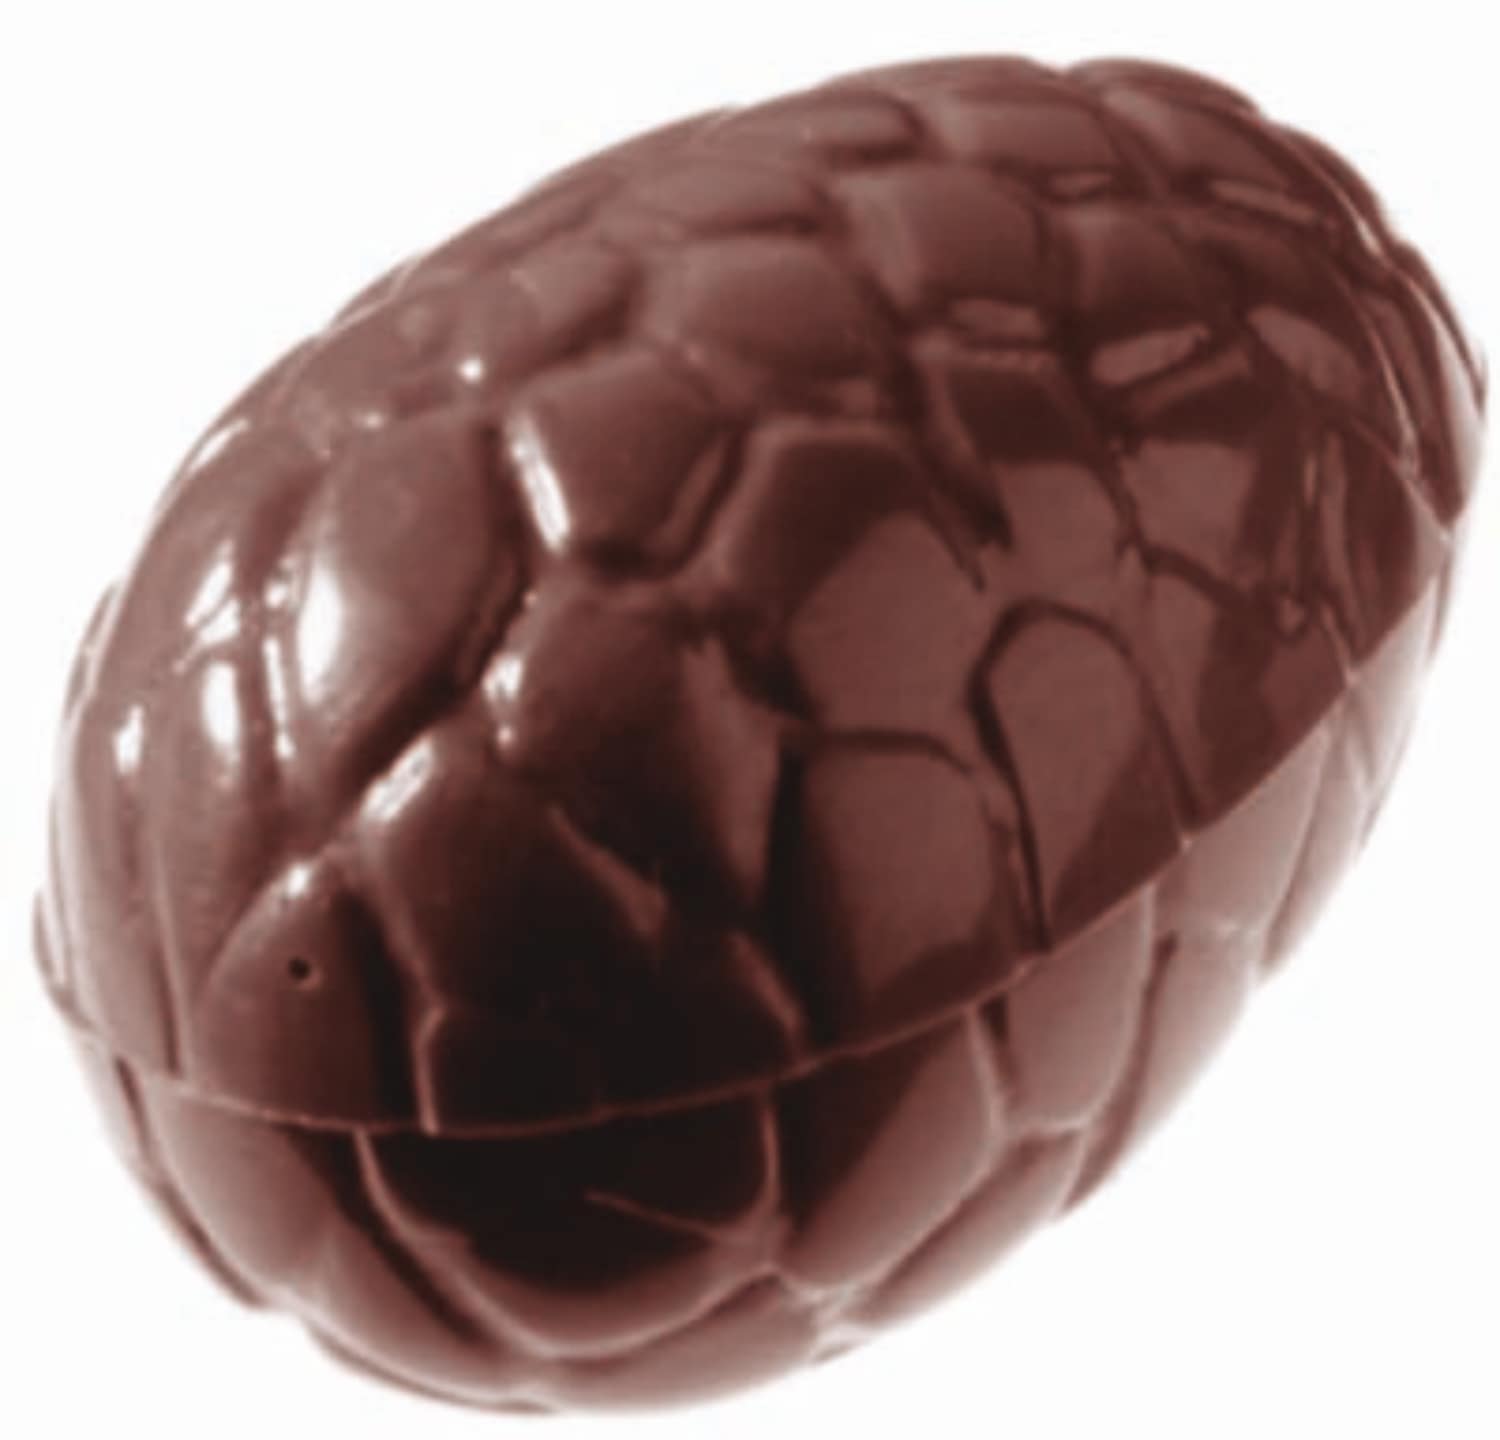 Chocolate mould "Easter egg" 421516